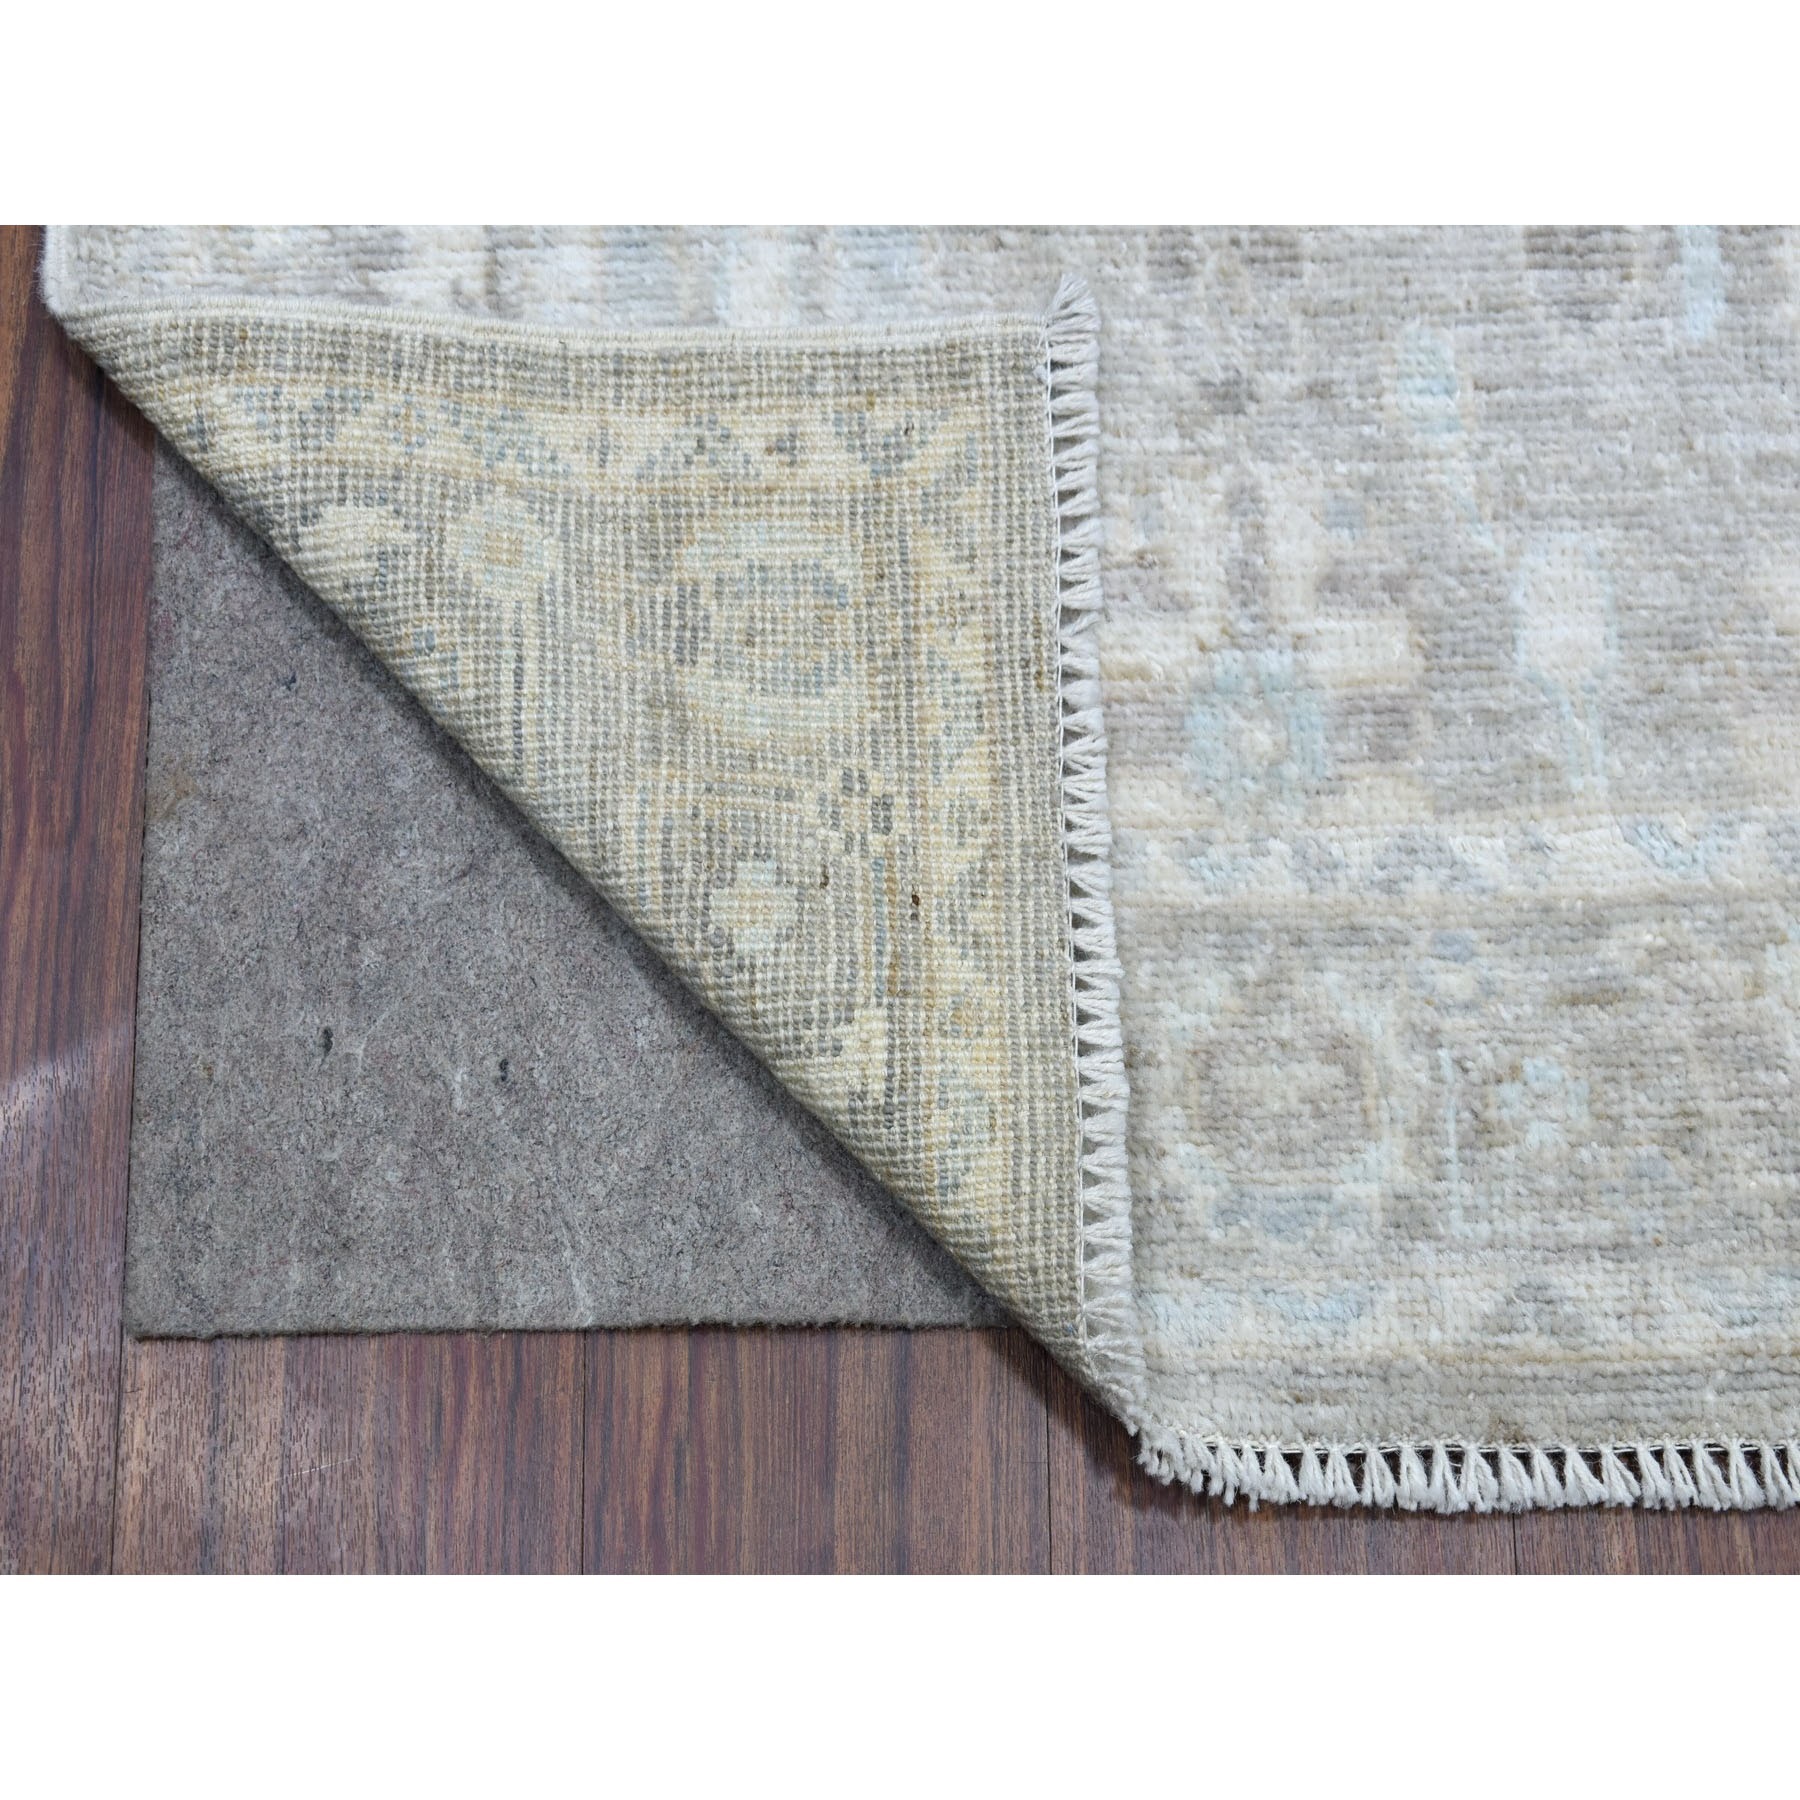 2'9"x16' Gray Hand Woven Angora Oushak with All Over Design Soft Afghan Wool Oriental XL Runner Rug 